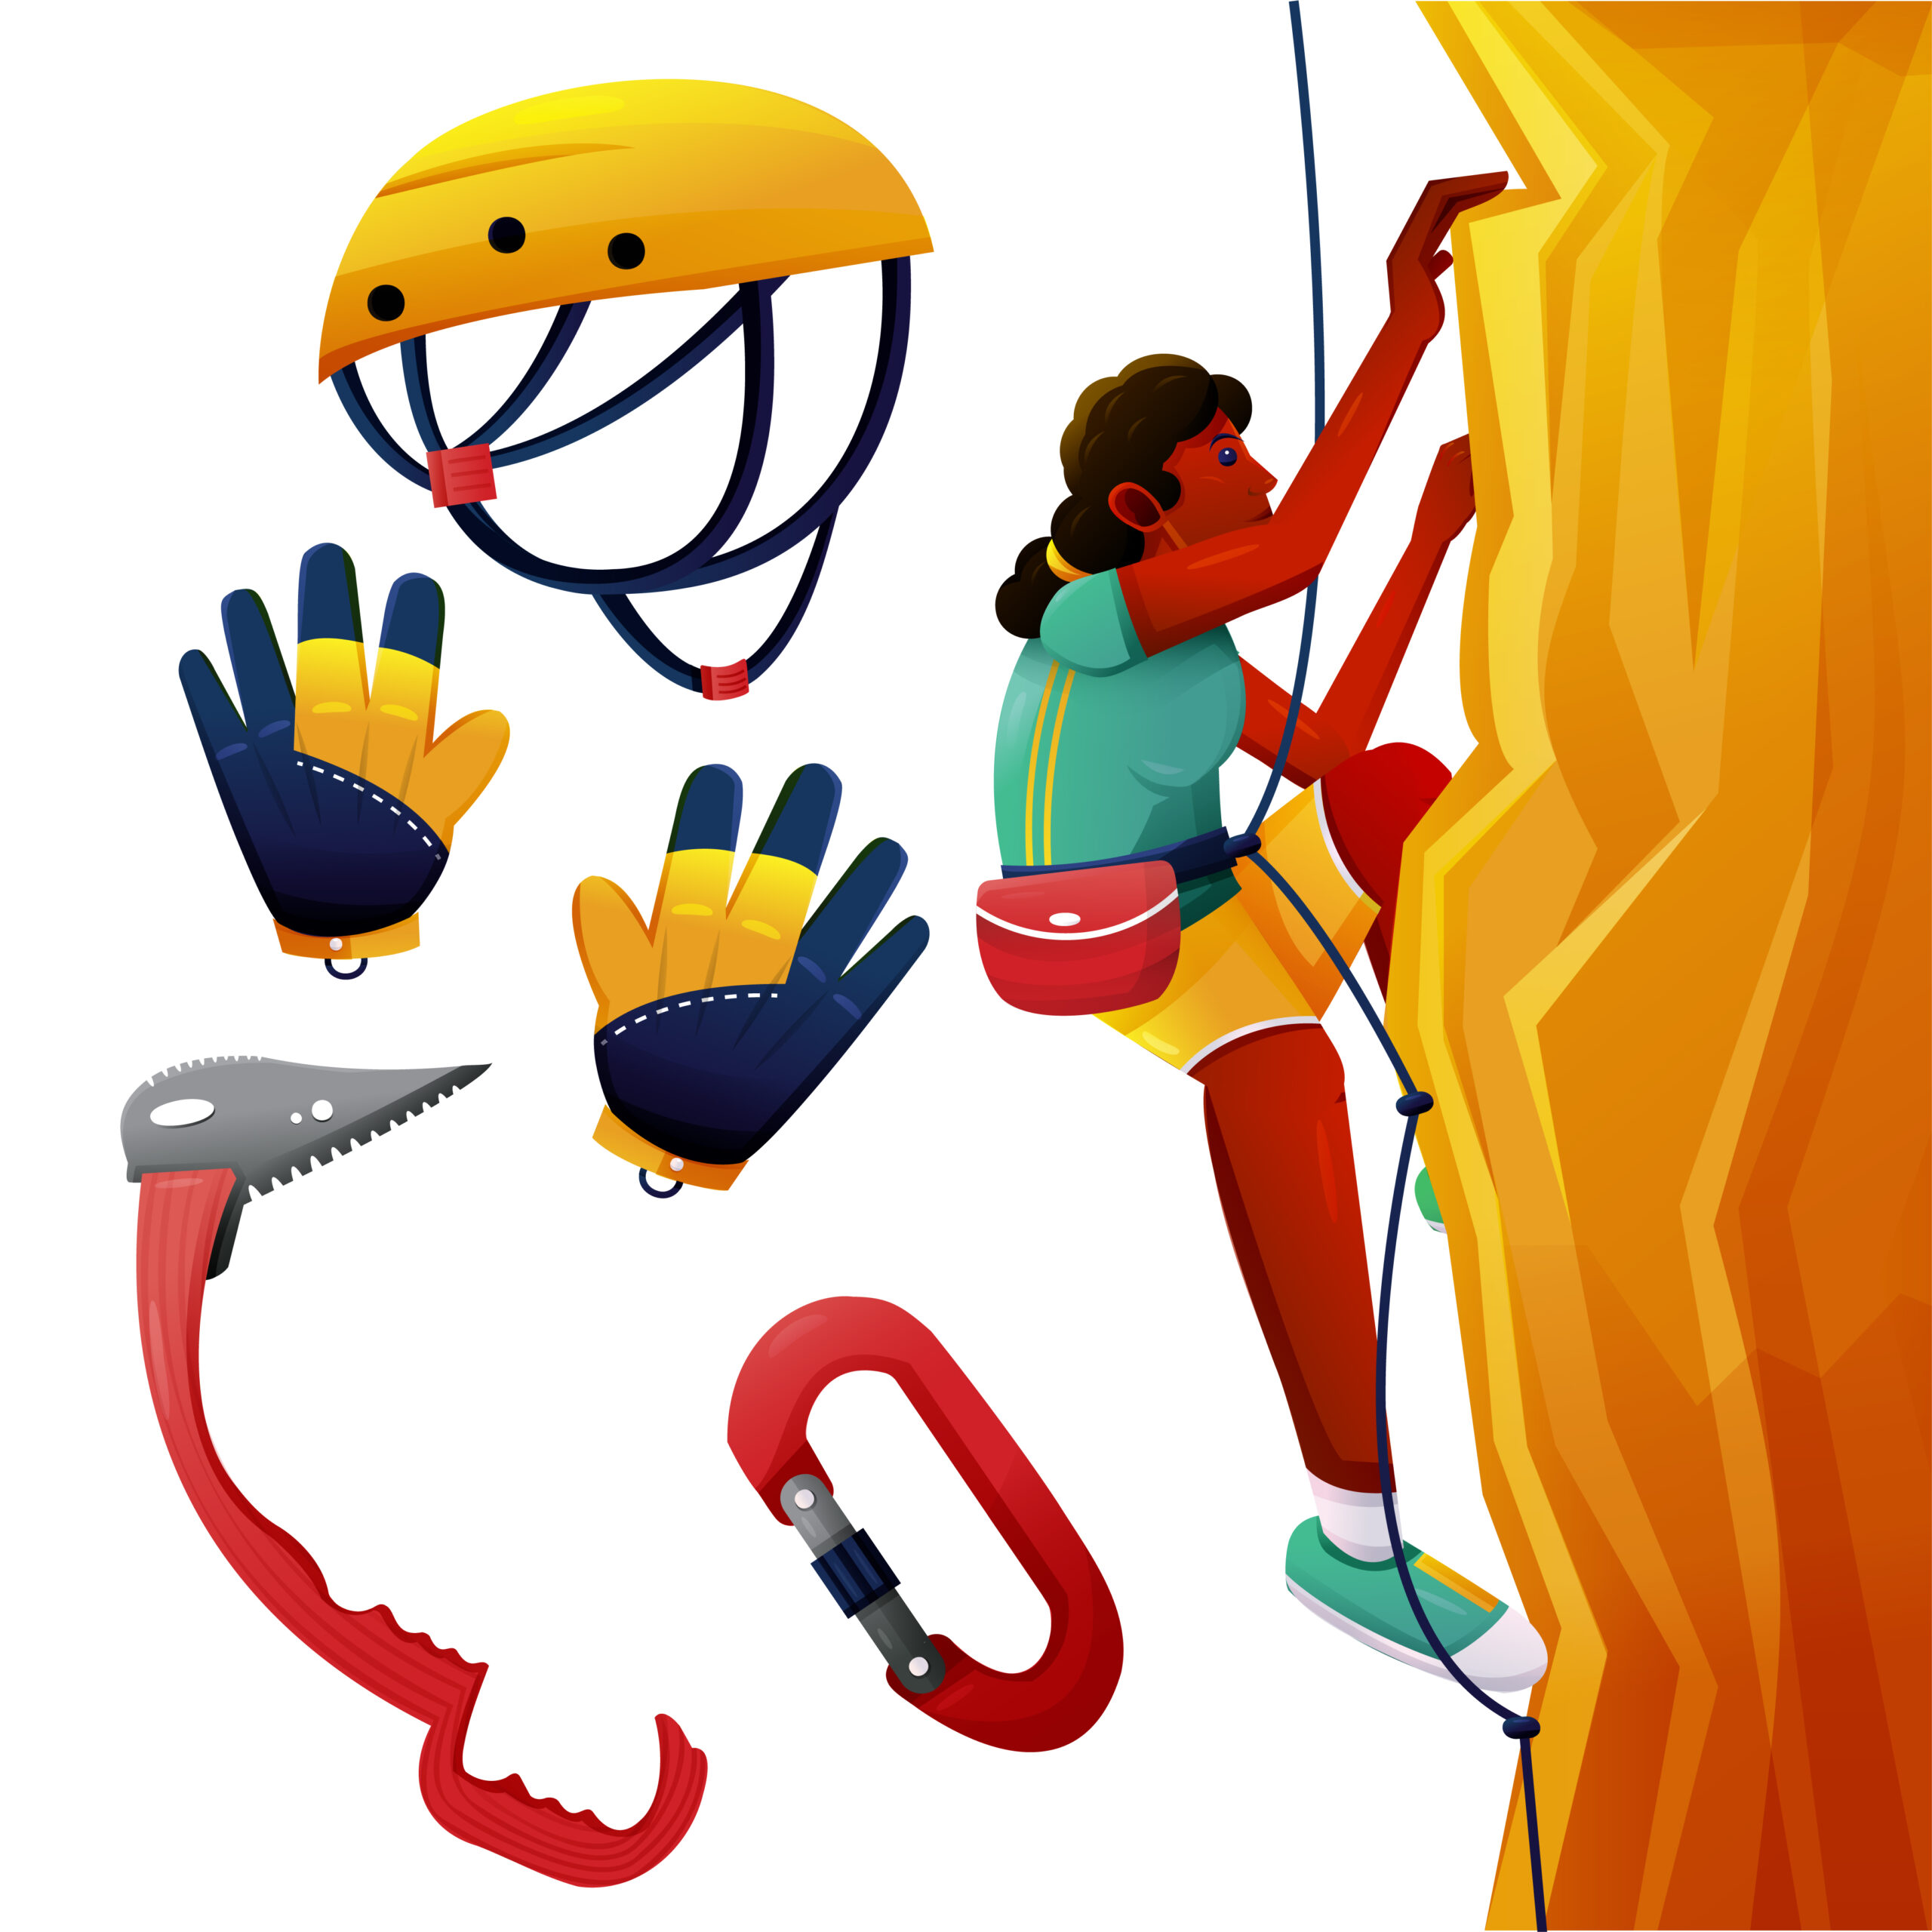 rappelling and abseiling terminology, safety, and purpose.